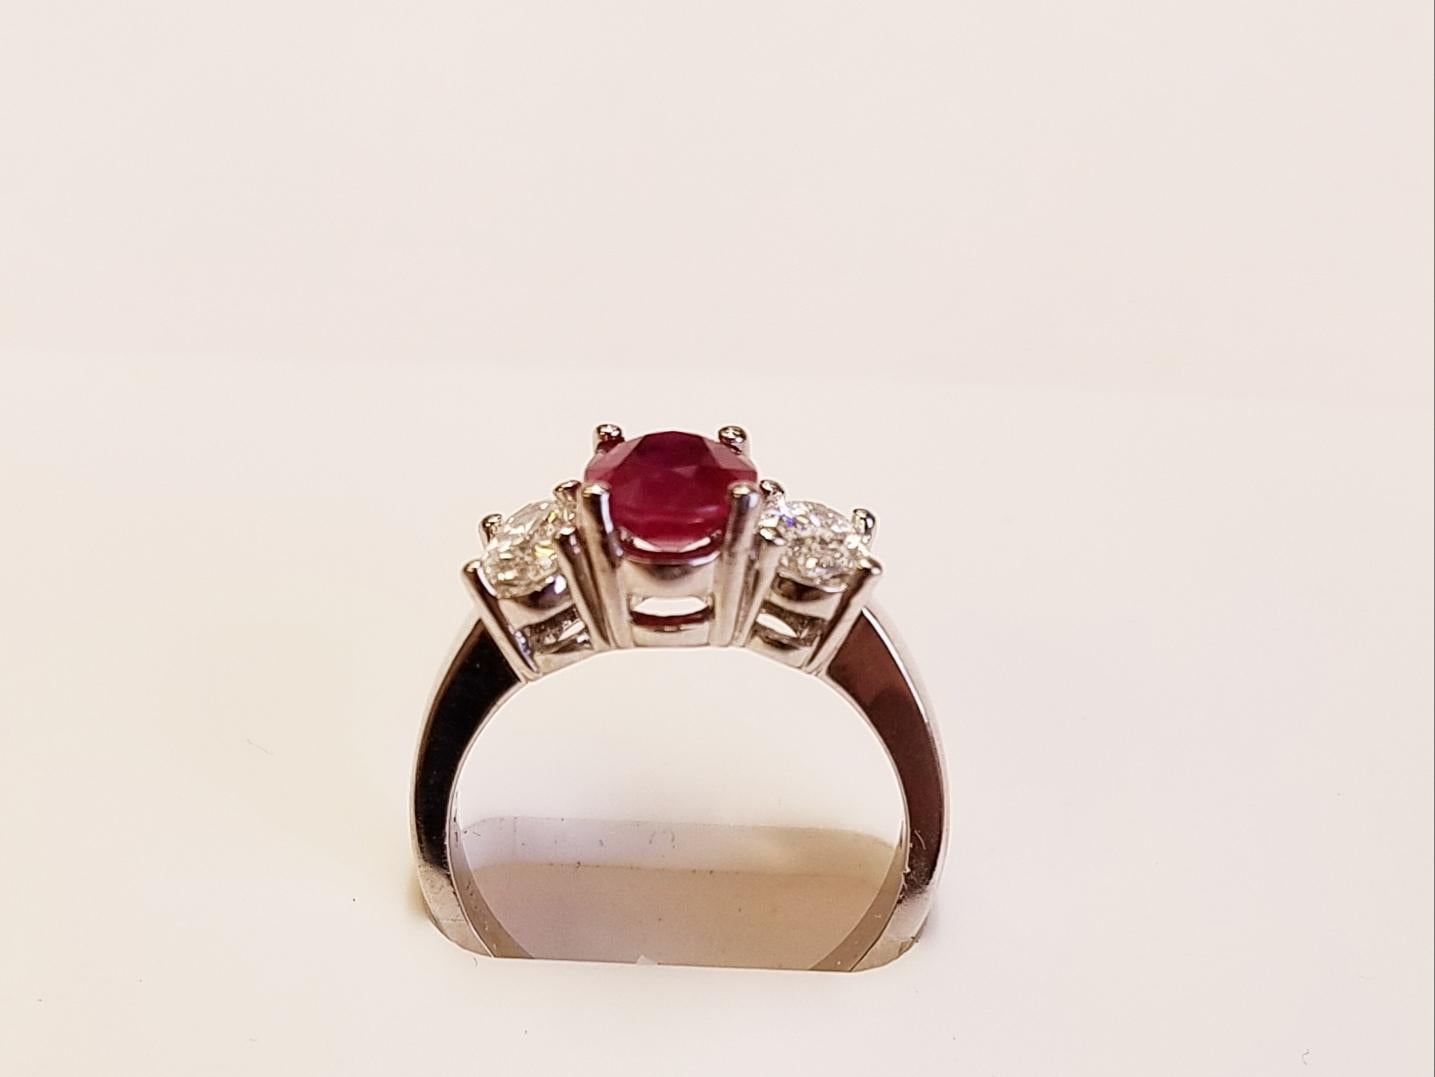 Contemporary Three-Stone 18 Karat White Gold Oval Cut Ruby and Diamond Ring